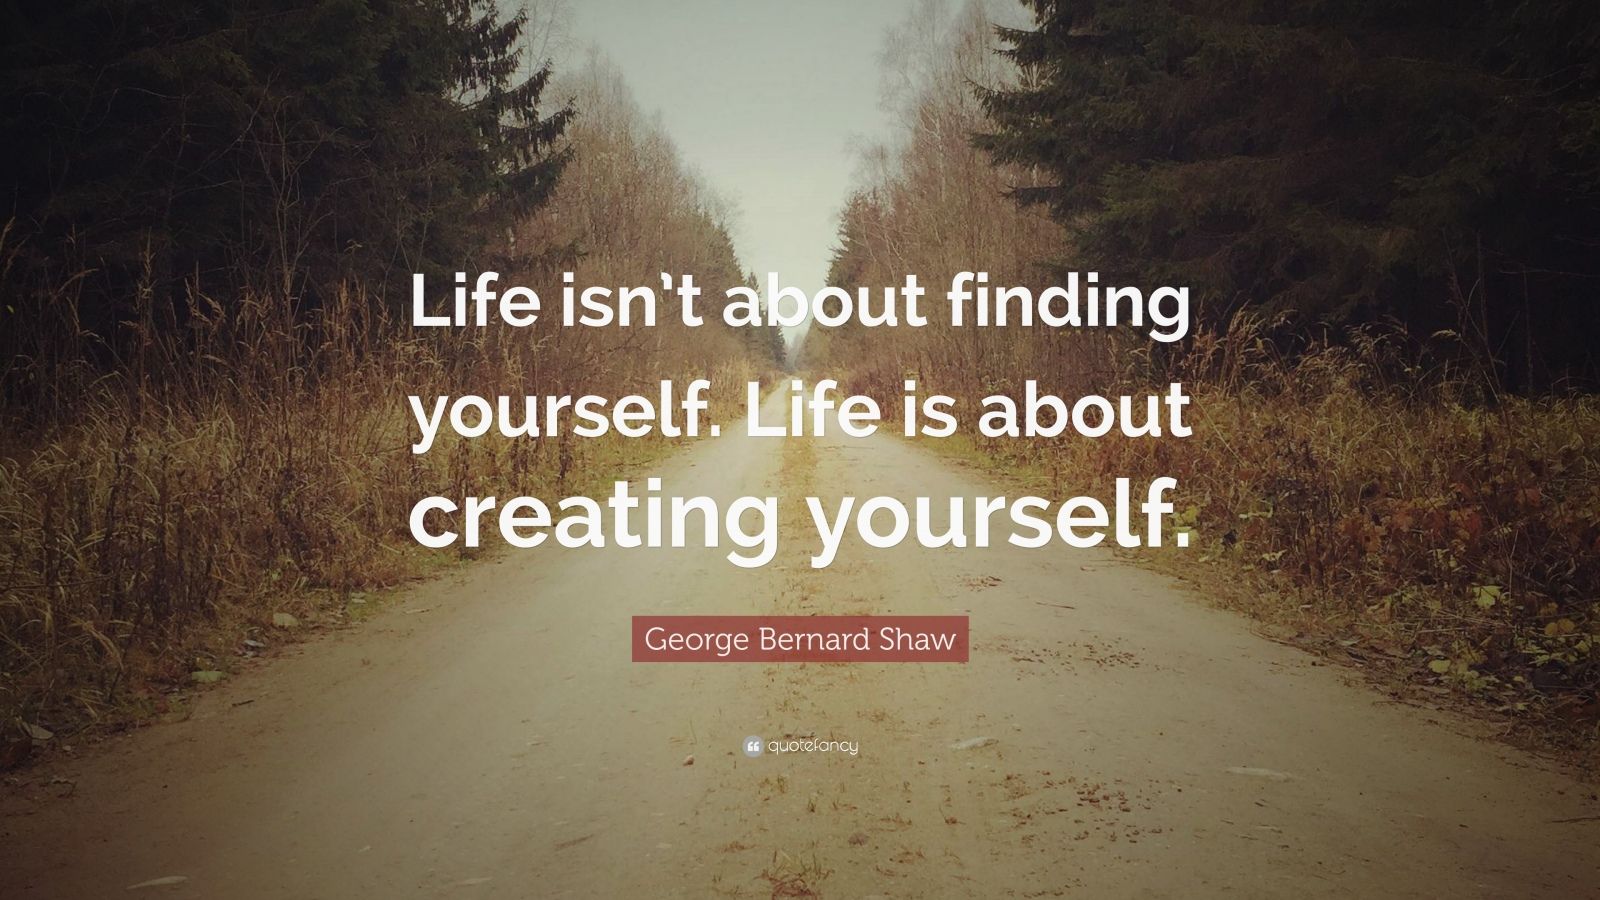 George Bernard Shaw Quote: “Life isn’t about finding yourself. Life is